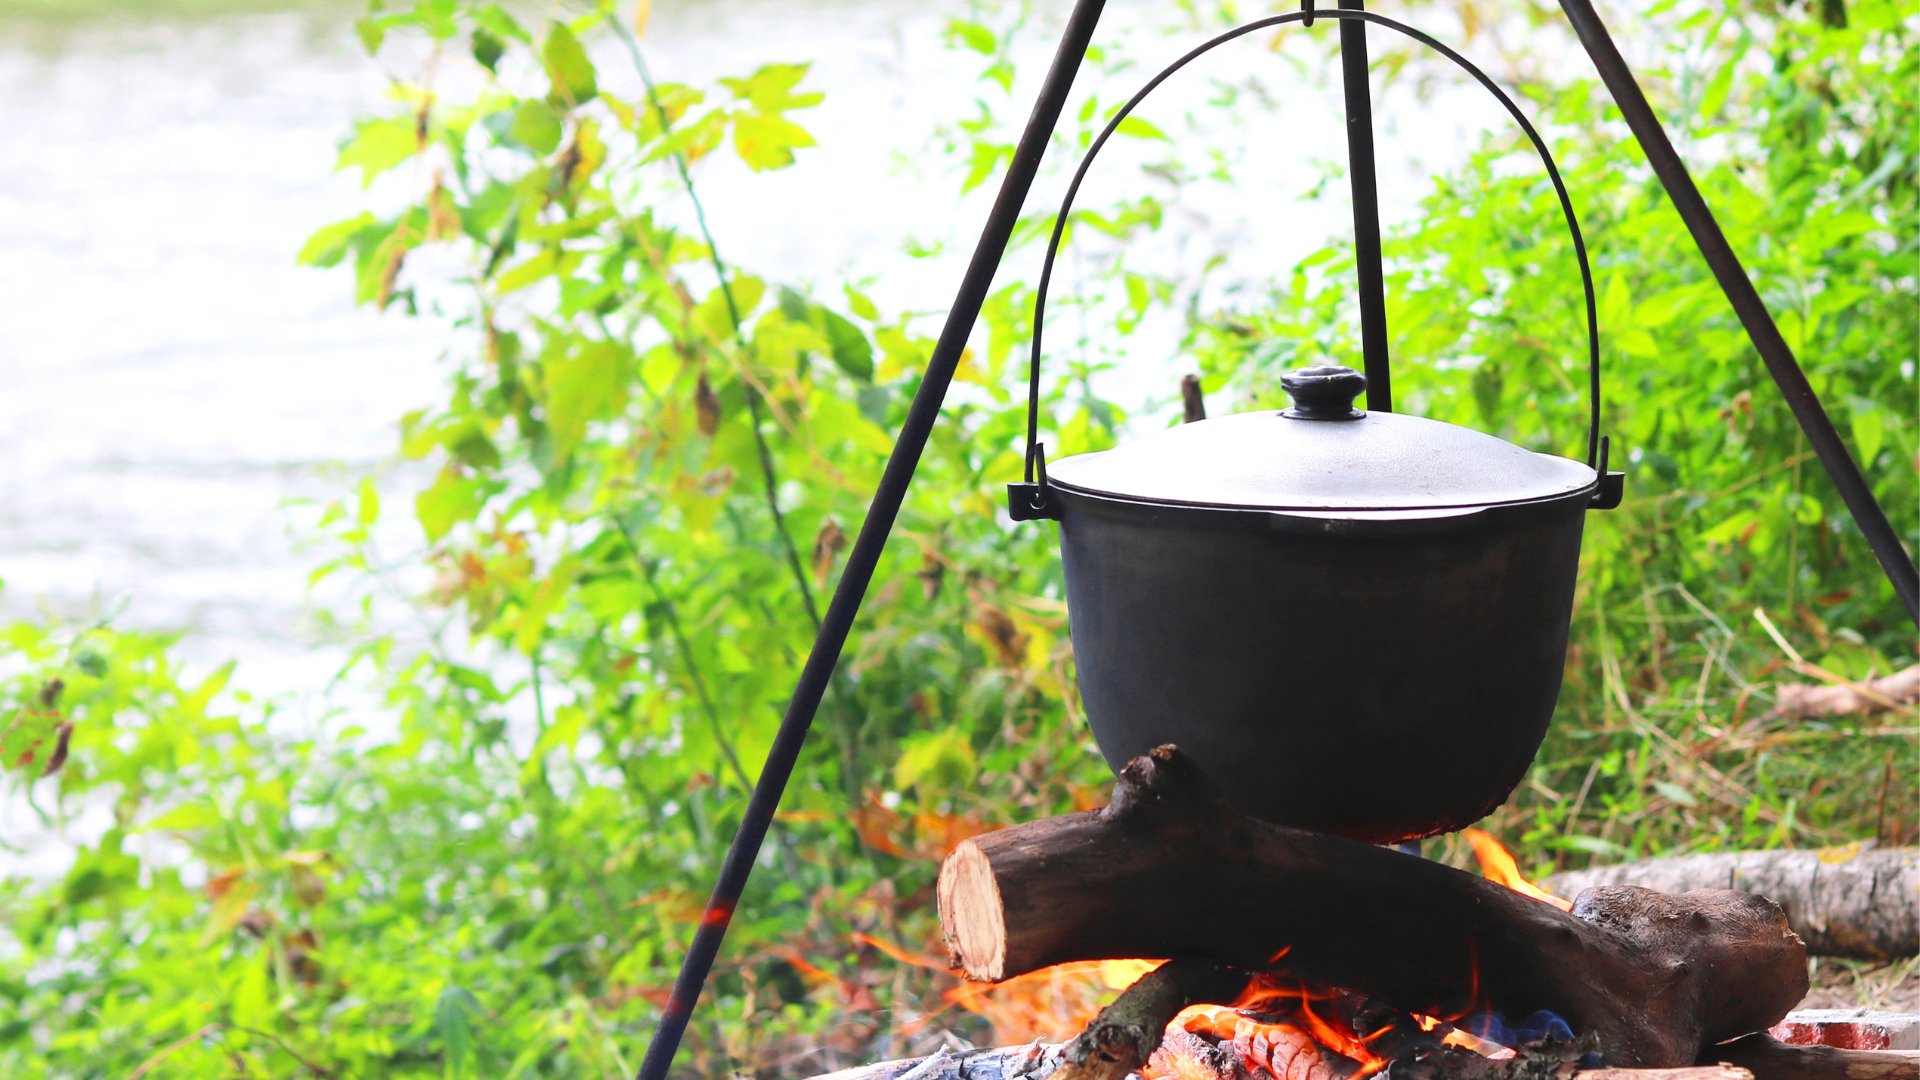 Campfire tripod with pot on it cooking